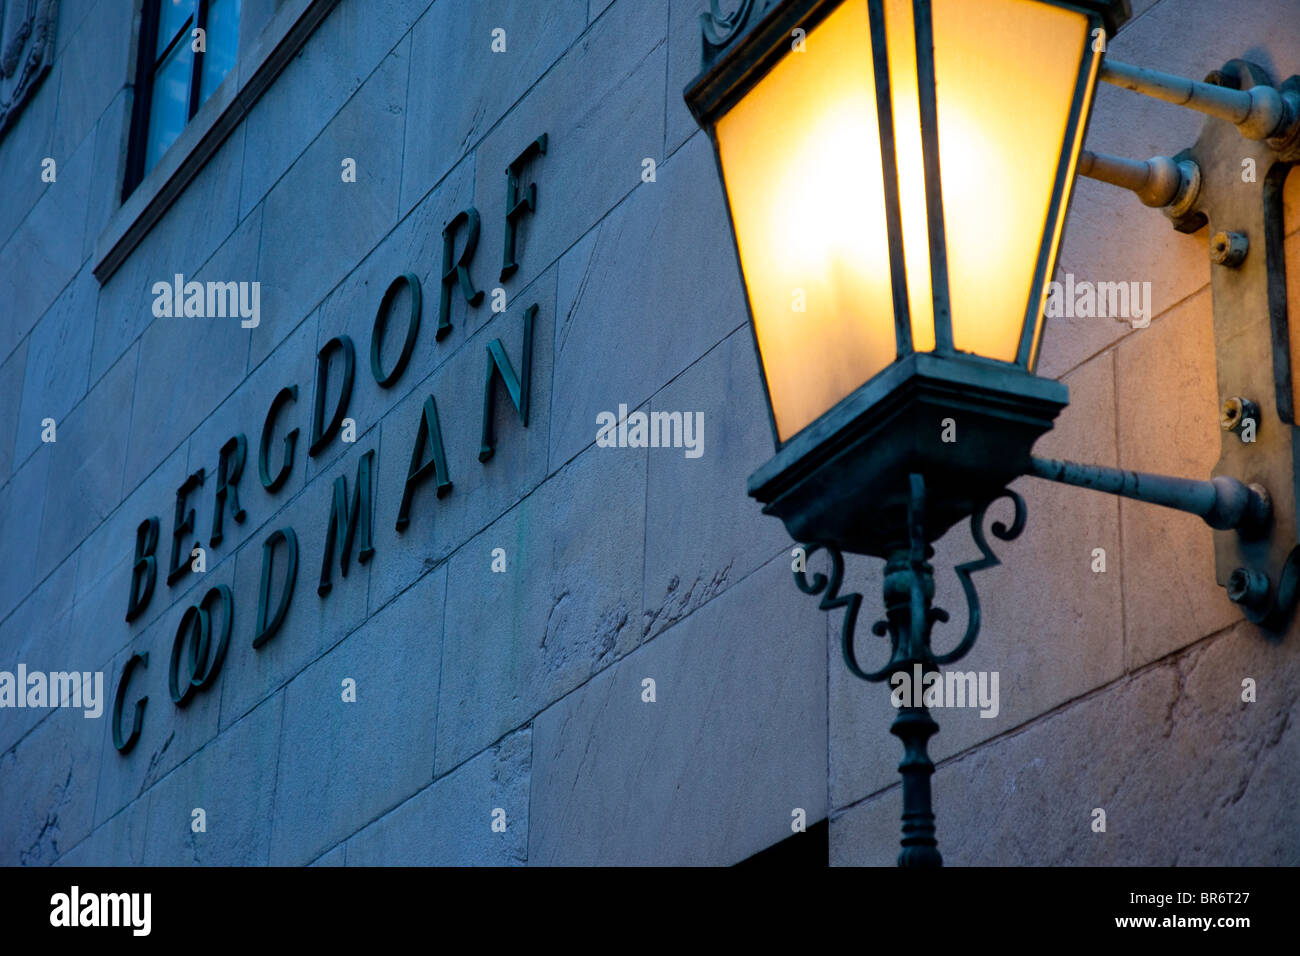 Bergdorf new york hi-res stock photography and images - Alamy